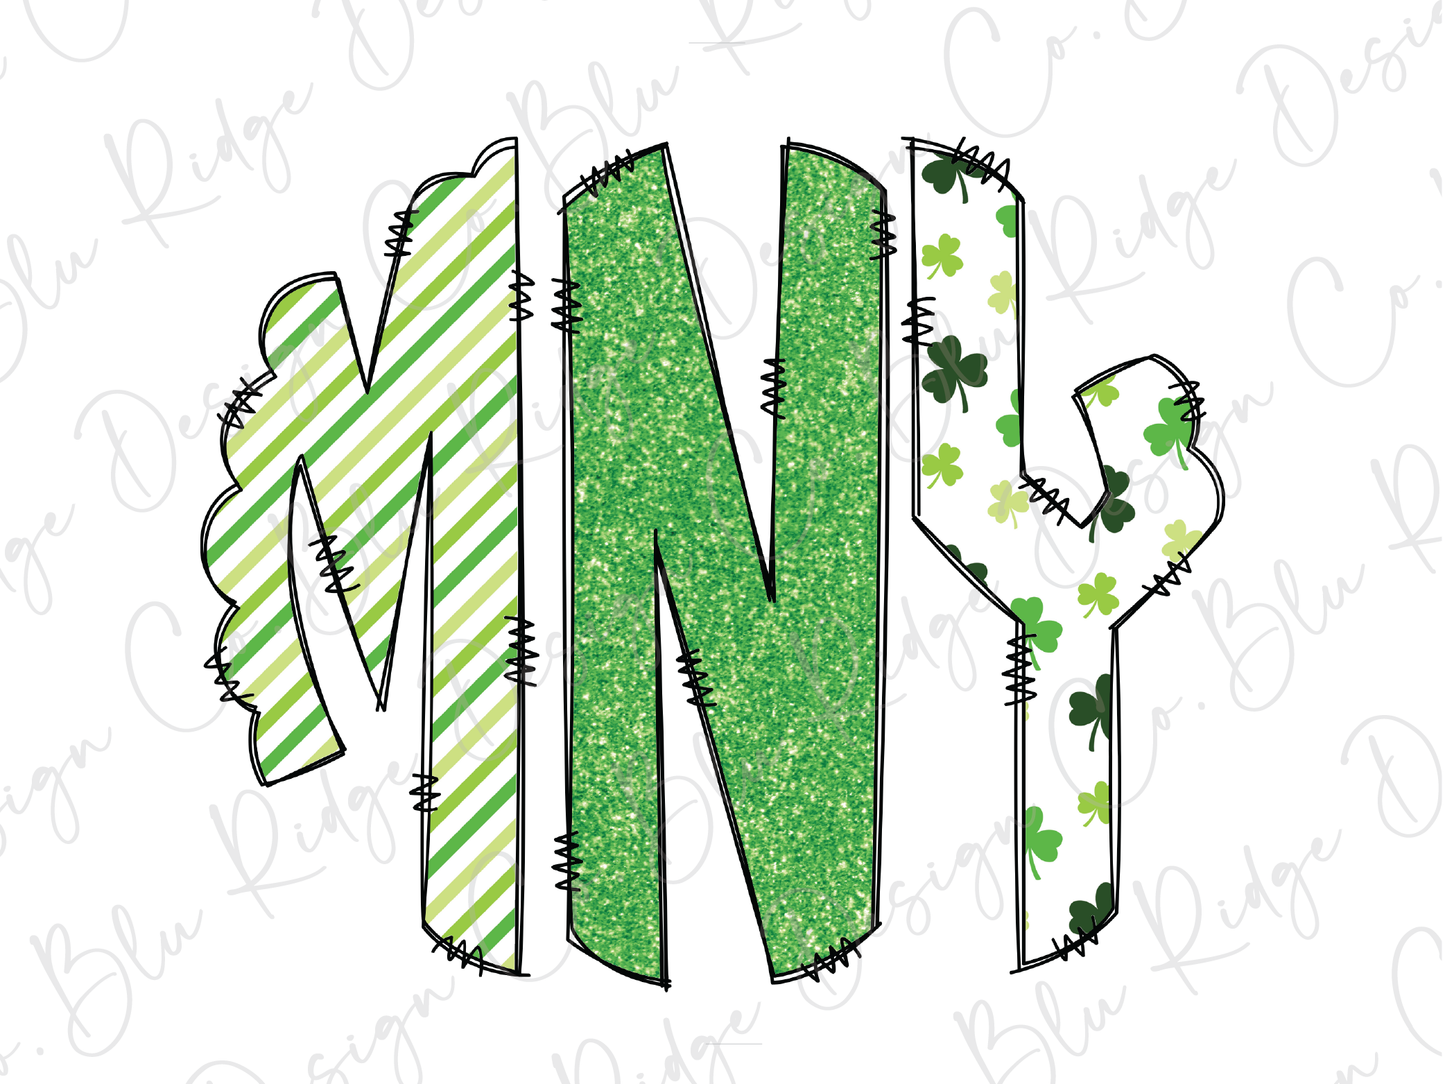 a st patrick's day letter m with shamrocks